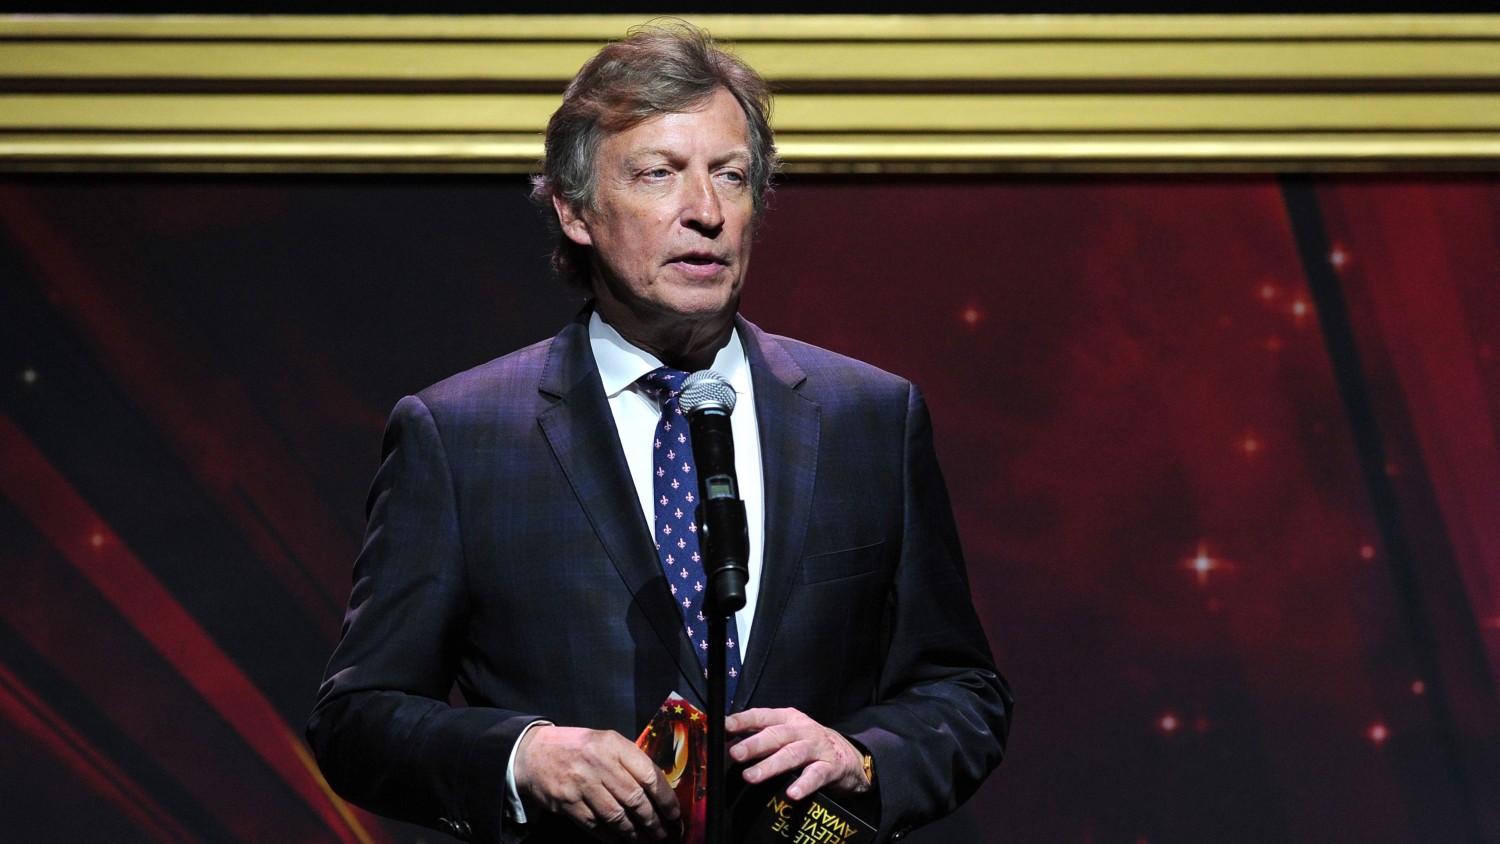 Nigel Lythgoe presents an award at the 36th College Television Awards, presented by the Television Academy Foundation at the Skirball Cultural Center in Los Angeles on Thursday, April 23, 2015.  Vince Bucci/Invision/AP